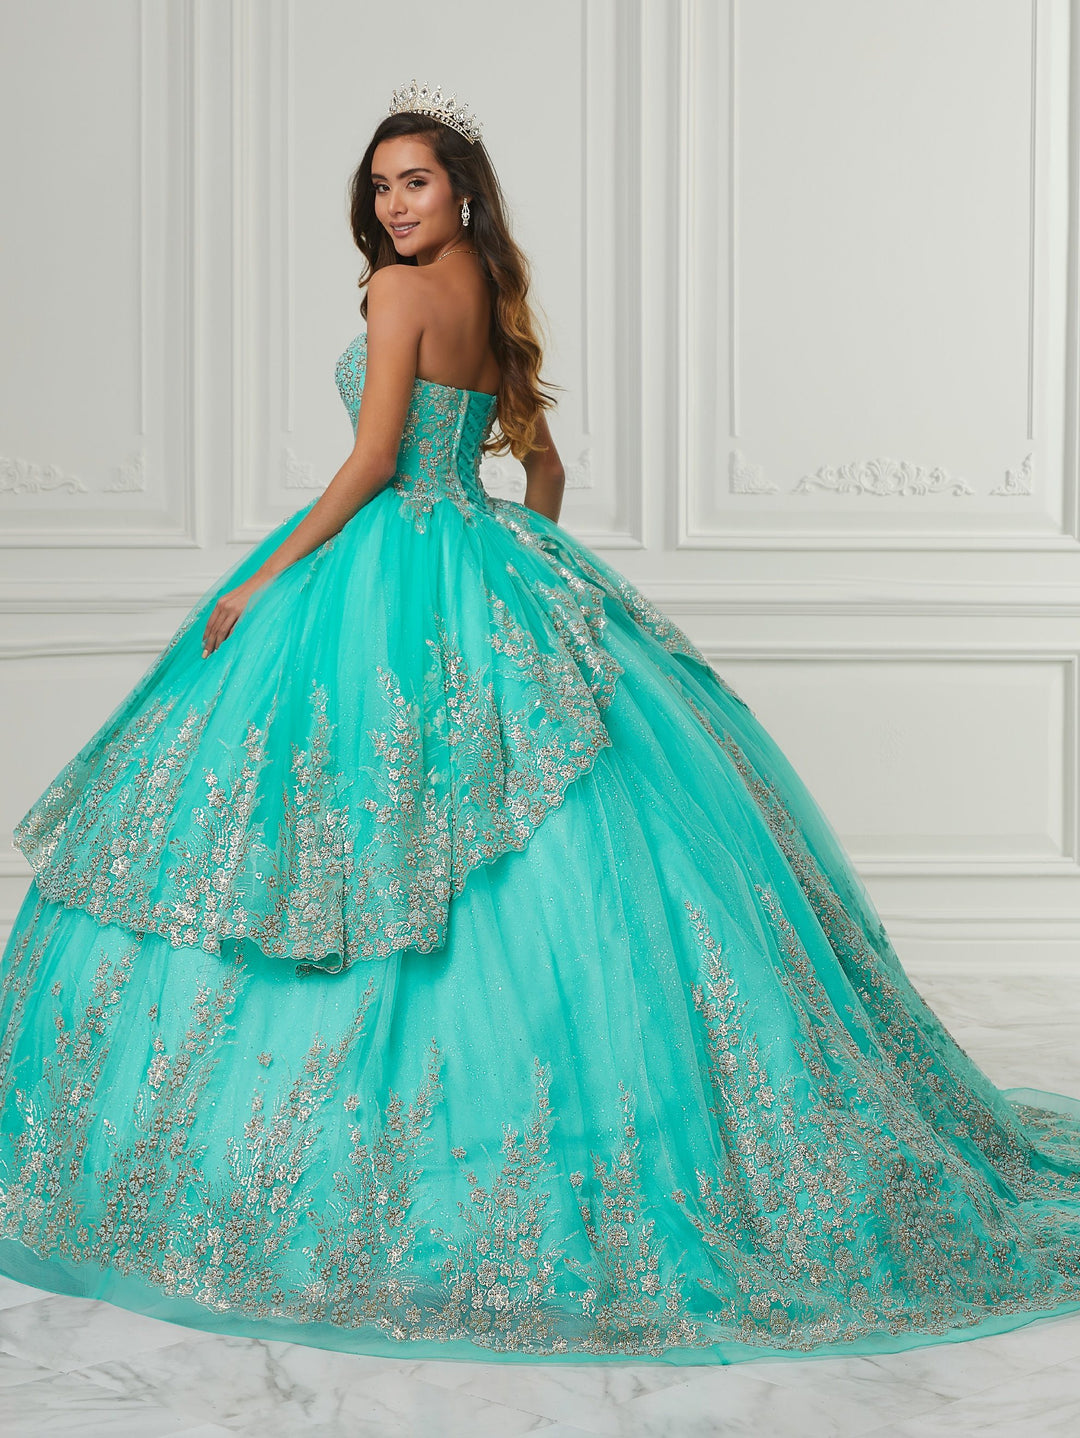 Strapless Quinceanera Dress by House of Wu 26986